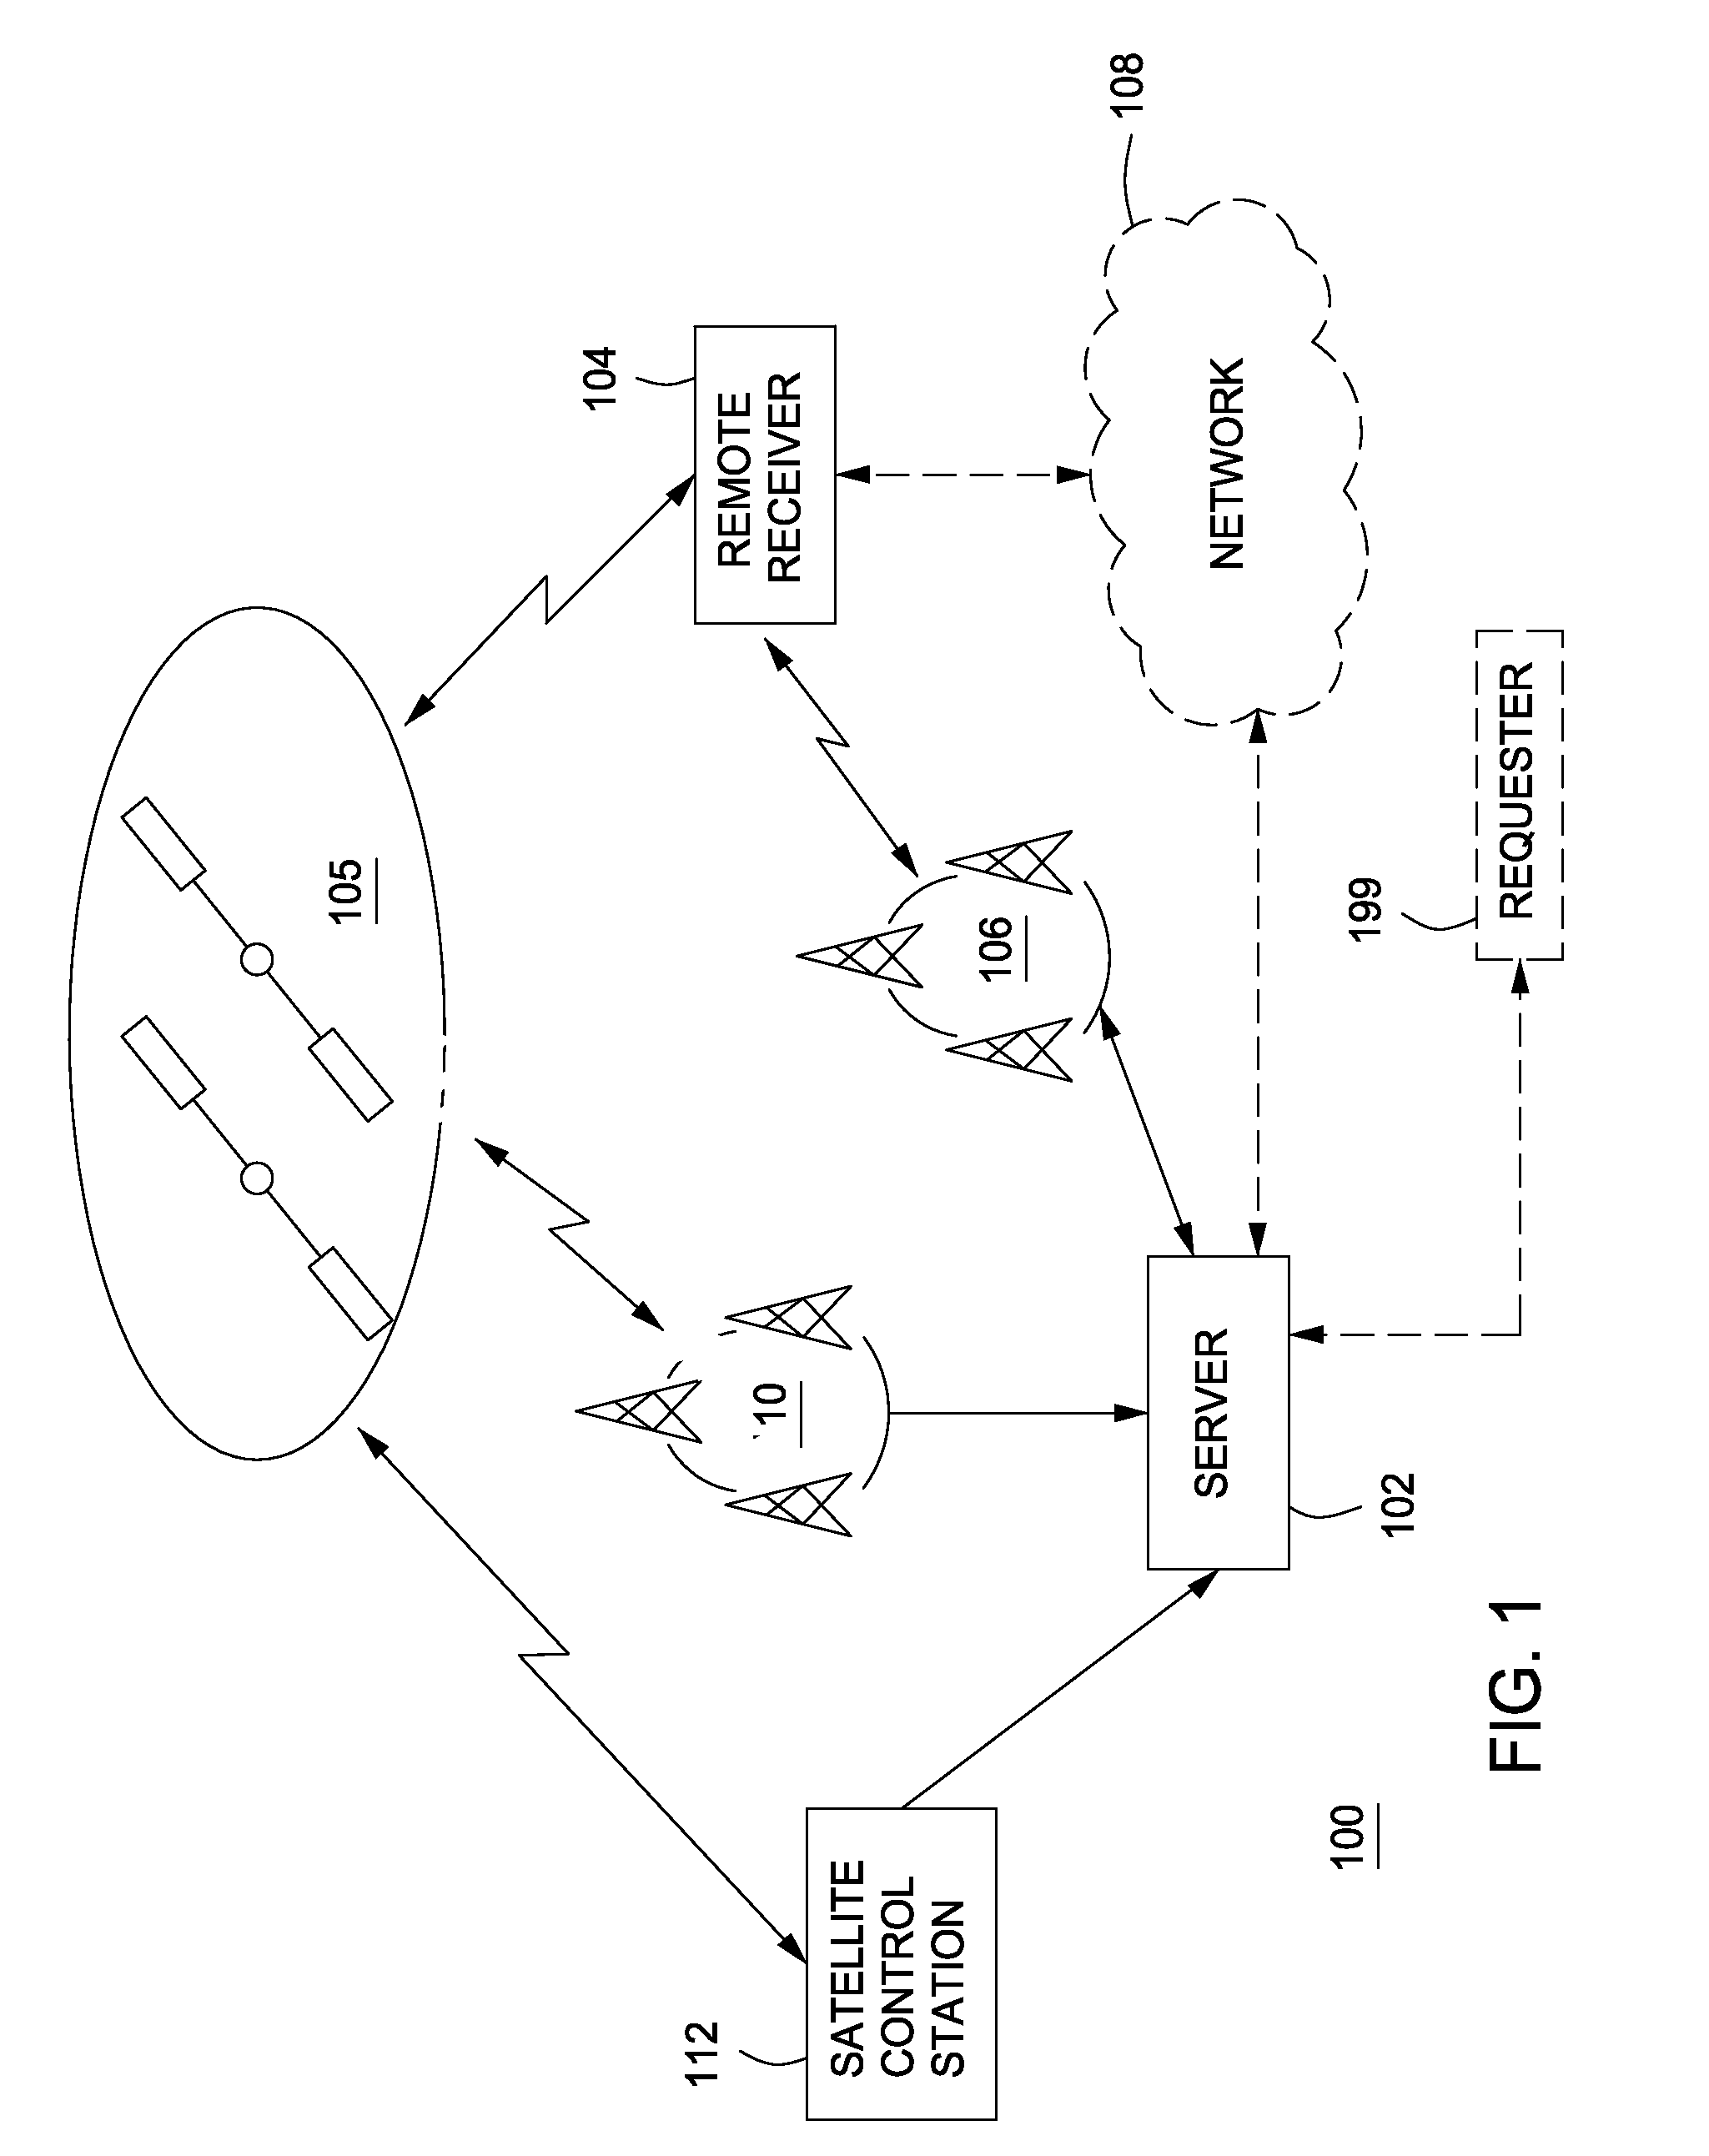 Method and apparatus for maintaining integrity of long-term orbits in a remote receiver